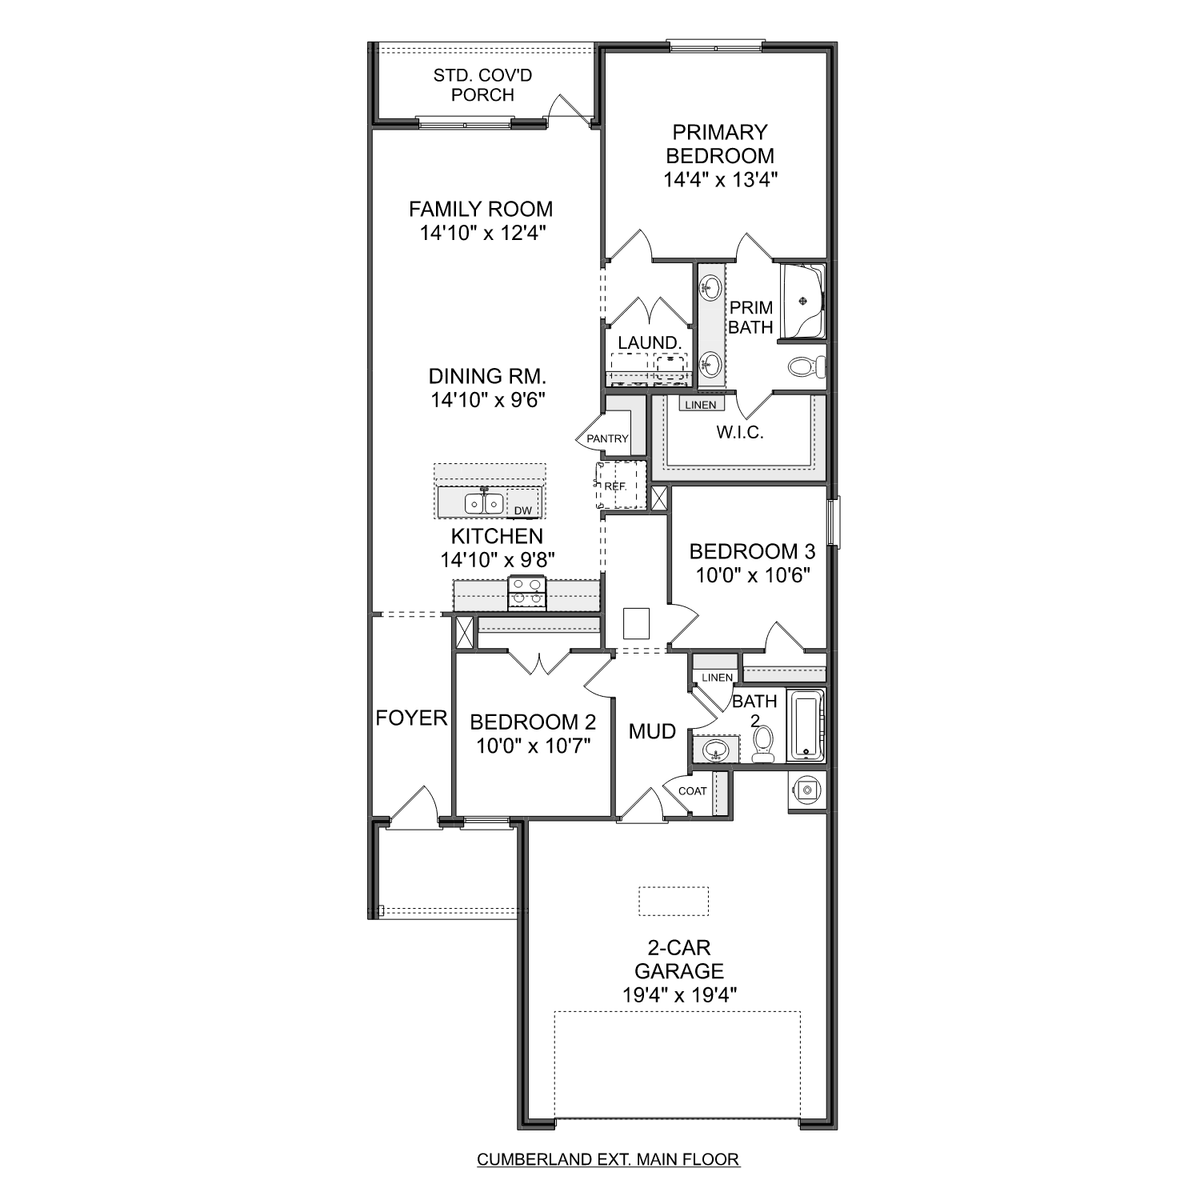 1 - The Cumberland floor plan layout for 3154 Mead Way SE in Davidson Homes' Hollon Meadow community.